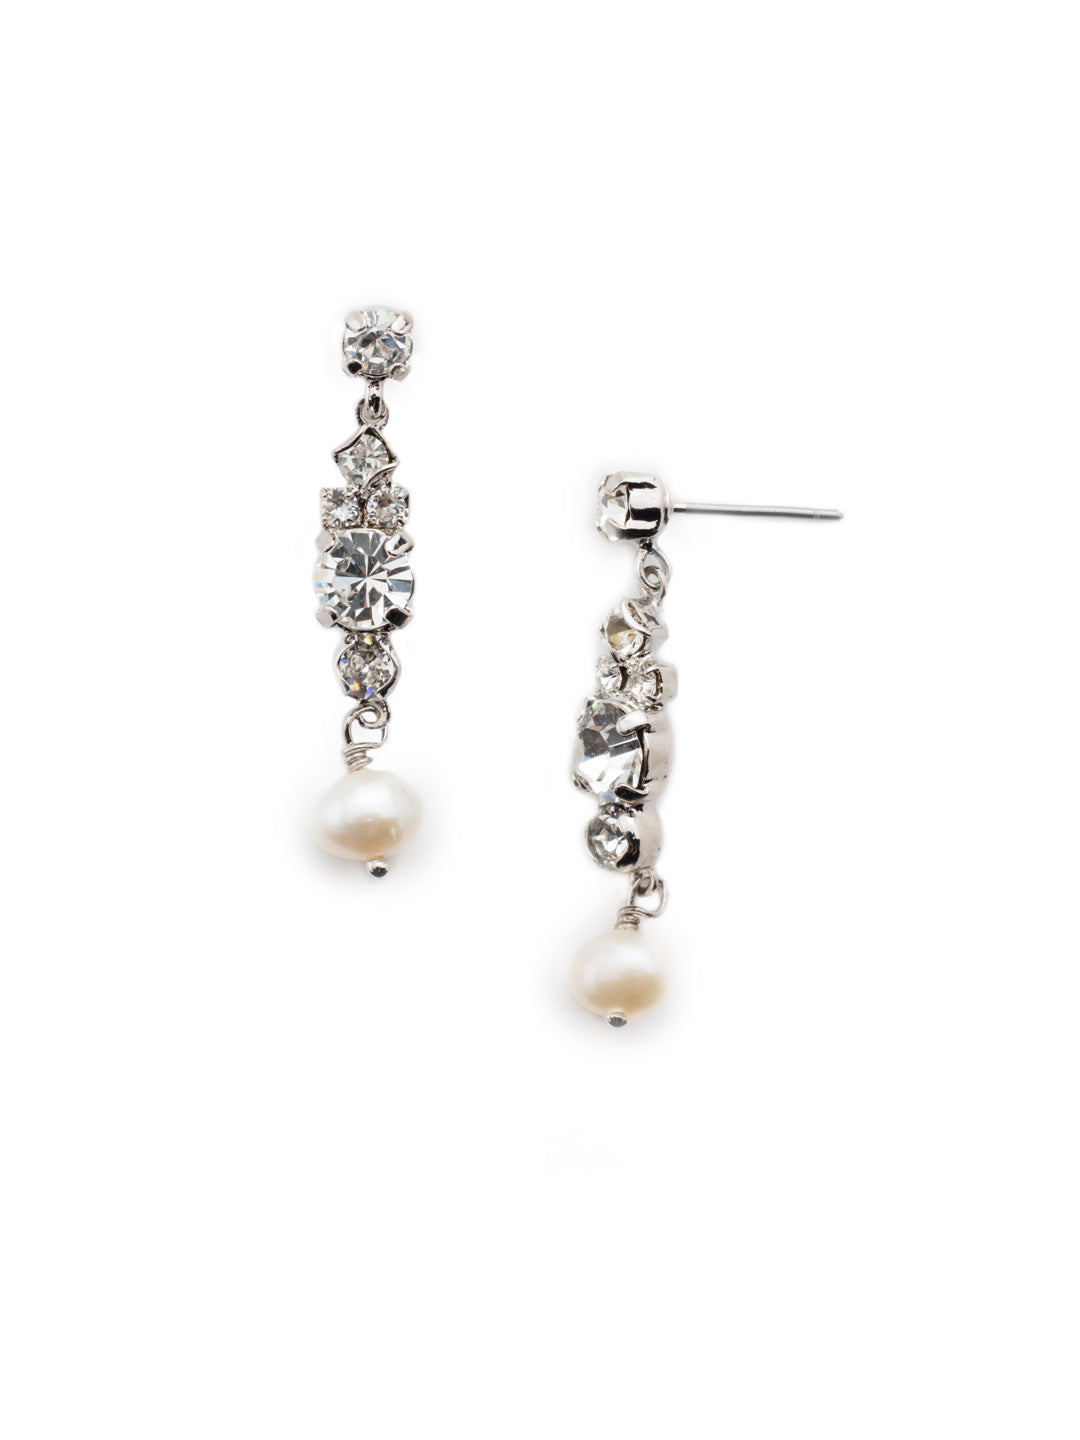 Stacked Rounds Dangle Earrings - EDH29RHCRY - <p>Our Stacked Rounds Drop Earring includes several perfectly aligned round crystals.These post earrings add the perfect amount of sparkle to any outfit! From Sorrelli's Crystal collection in our Palladium Silver-tone finish.</p>